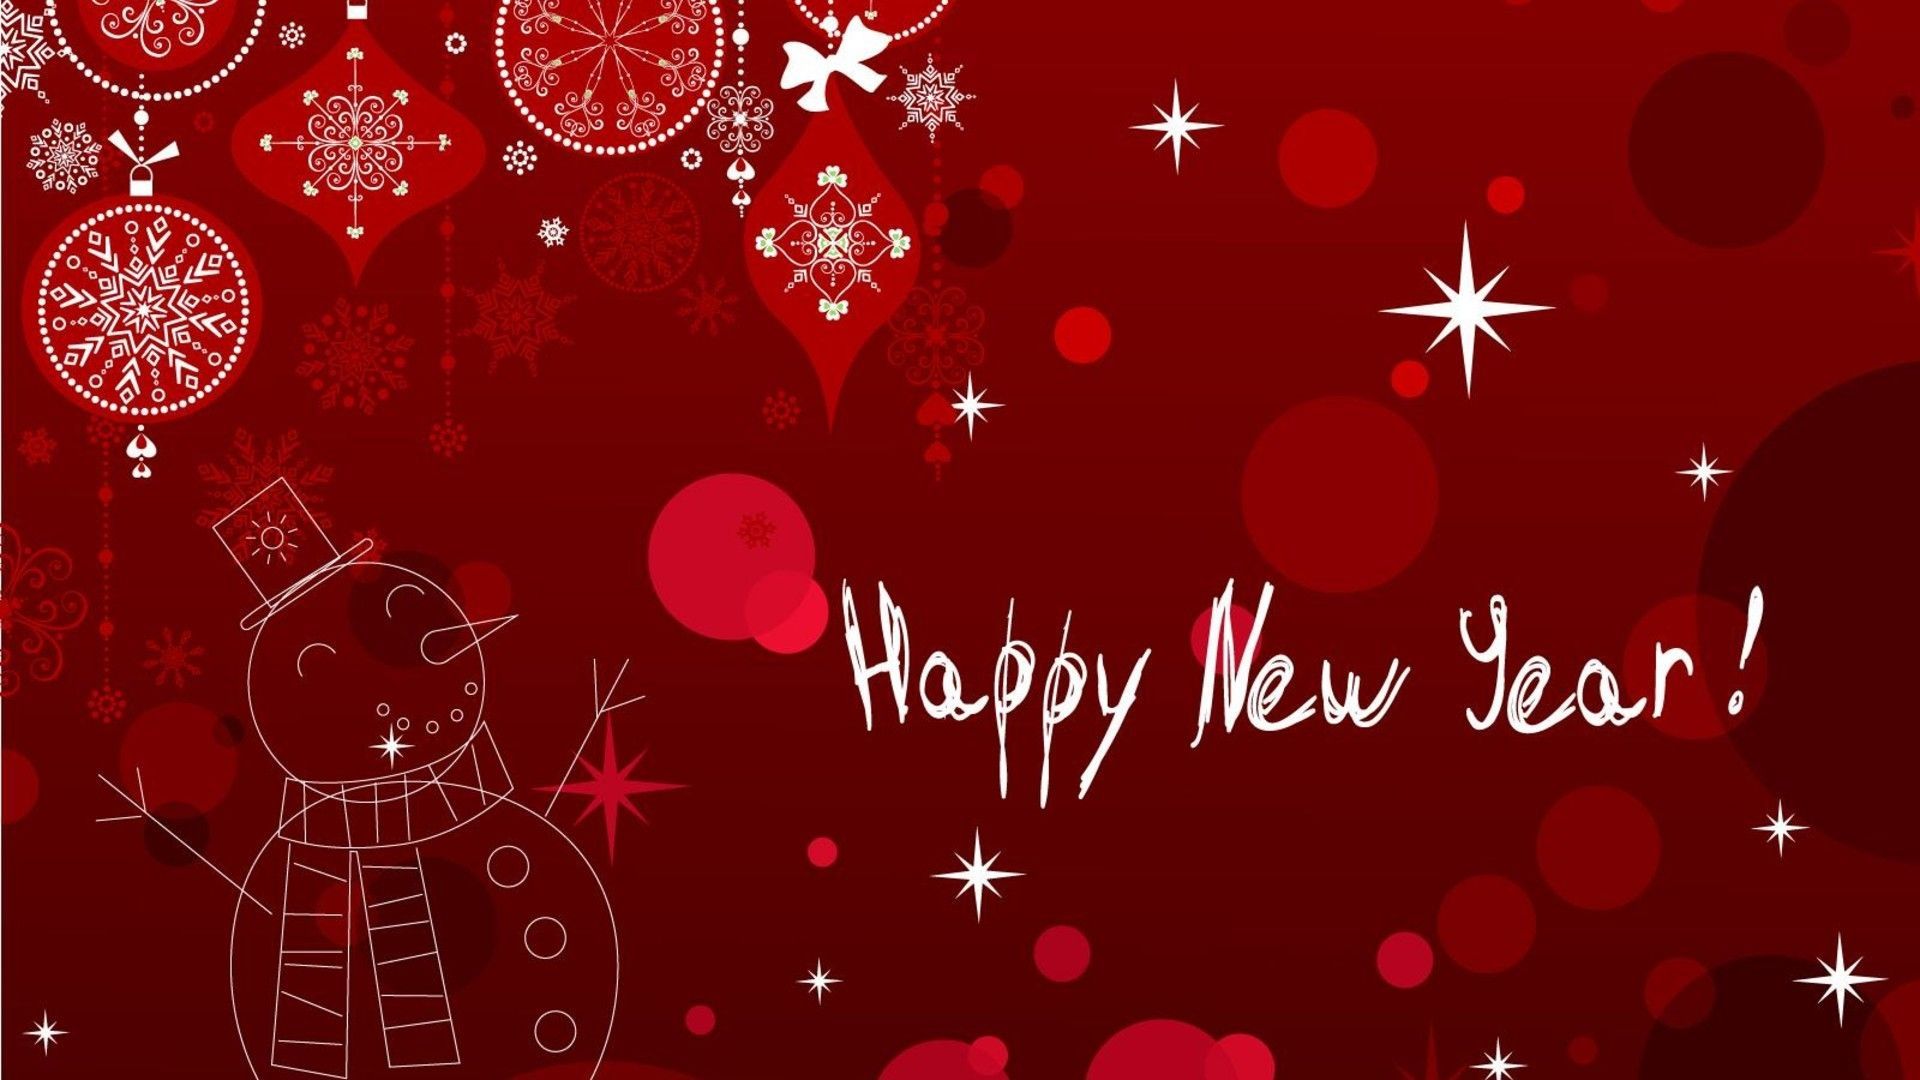 Happy New Year Wishes Quotes SMS 2018. Happy new year wallpaper, Happy new year image, Happy new year greetings